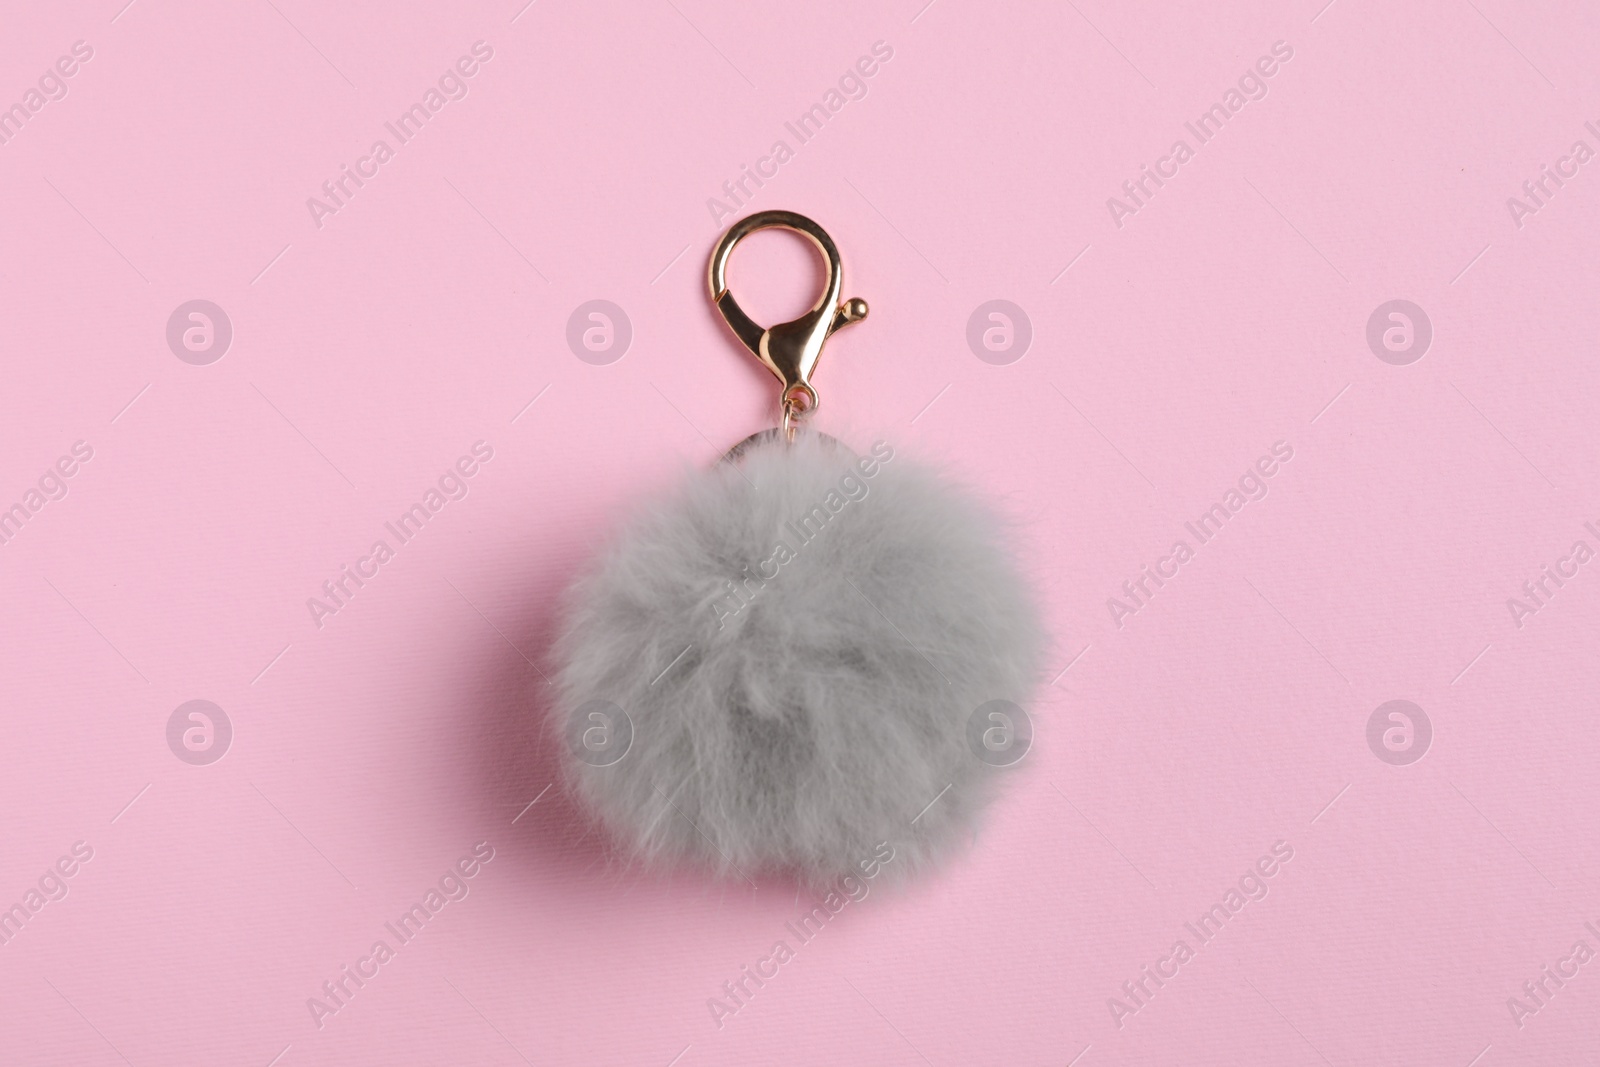 Photo of Gray fur keychain on pale pink background, top view